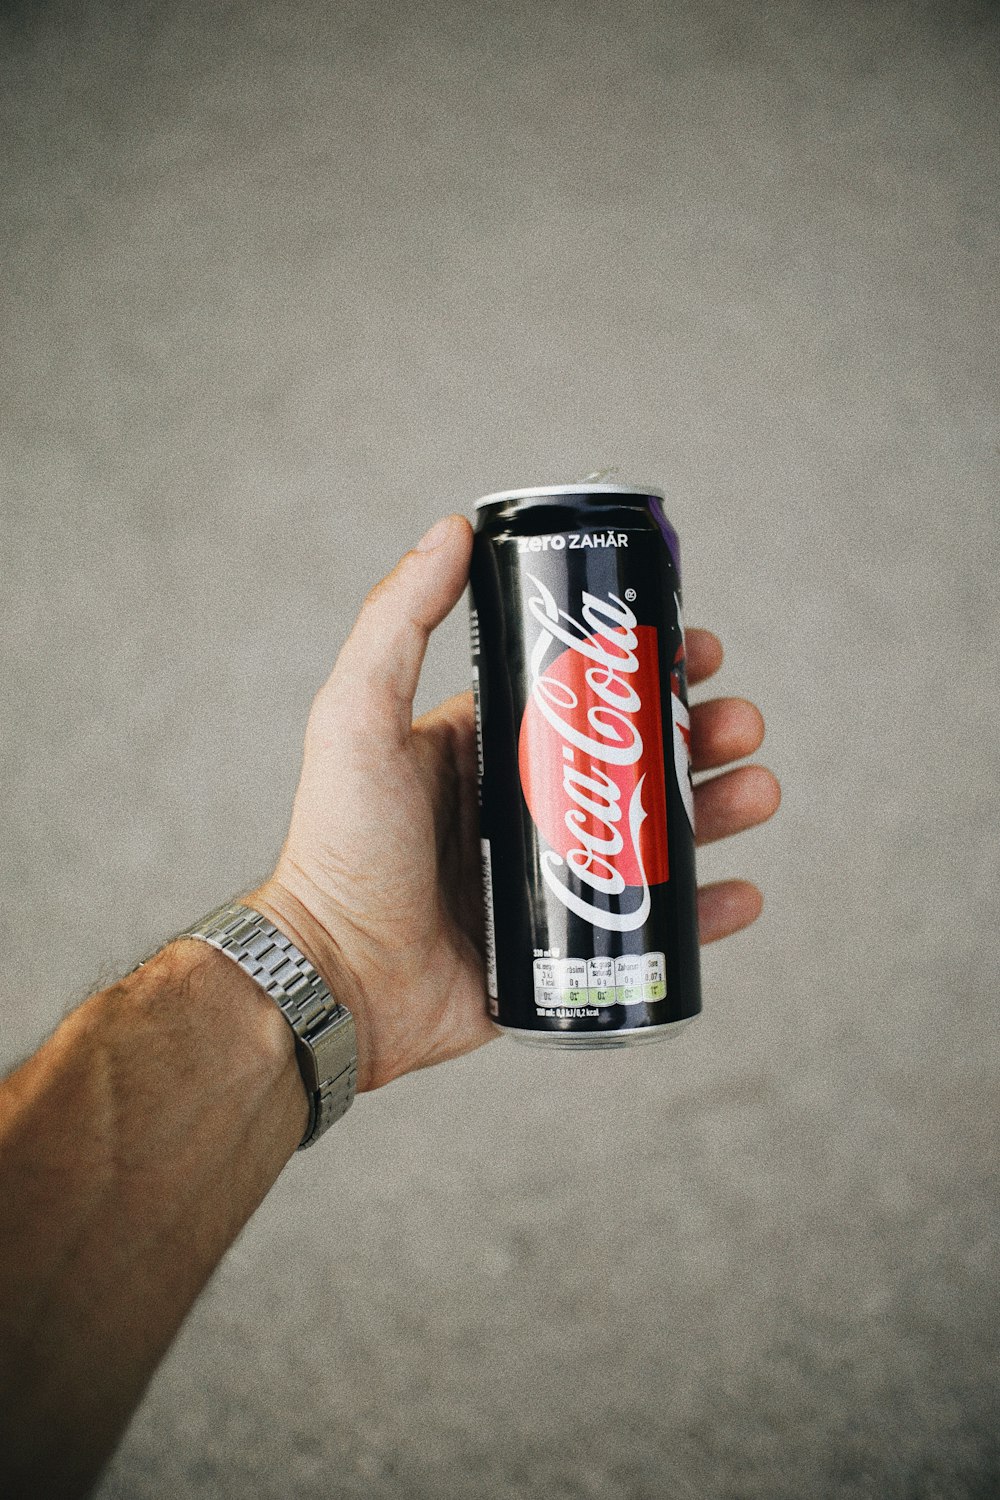 a hand holding a can of coca cola